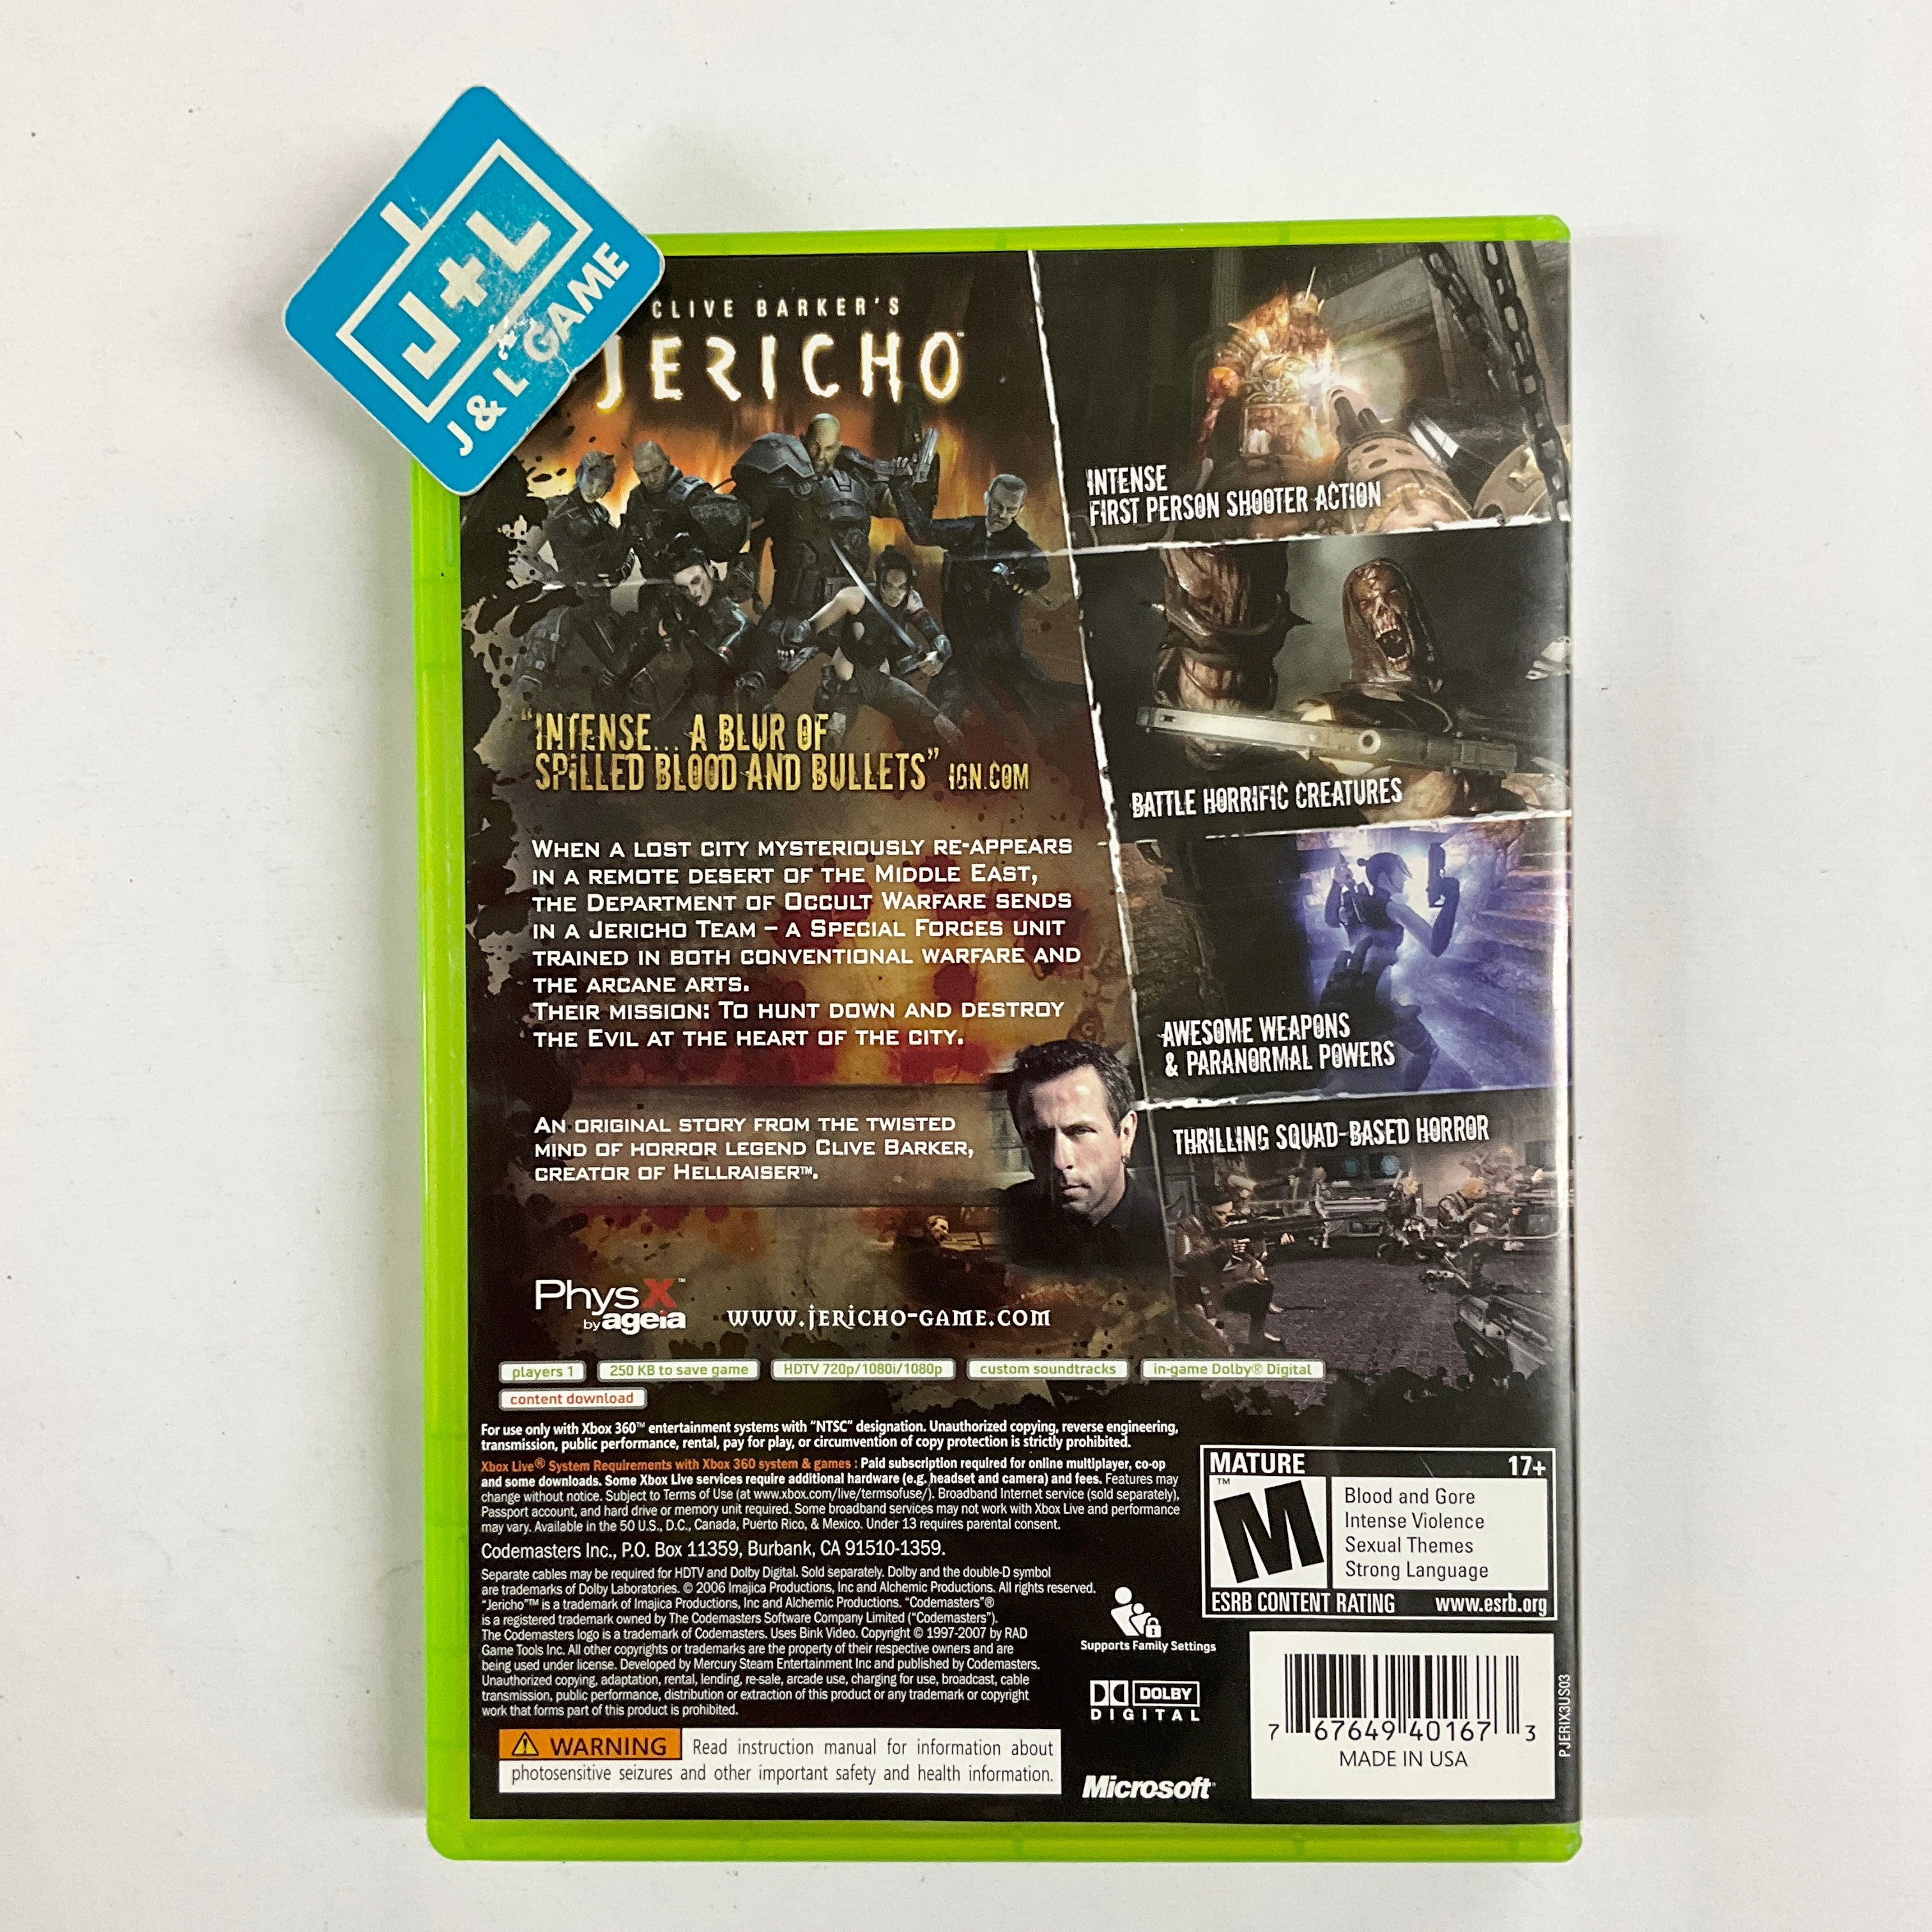 Clive Barker's Jericho - Xbox 360 [Pre-Owned] Video Games Codemasters   